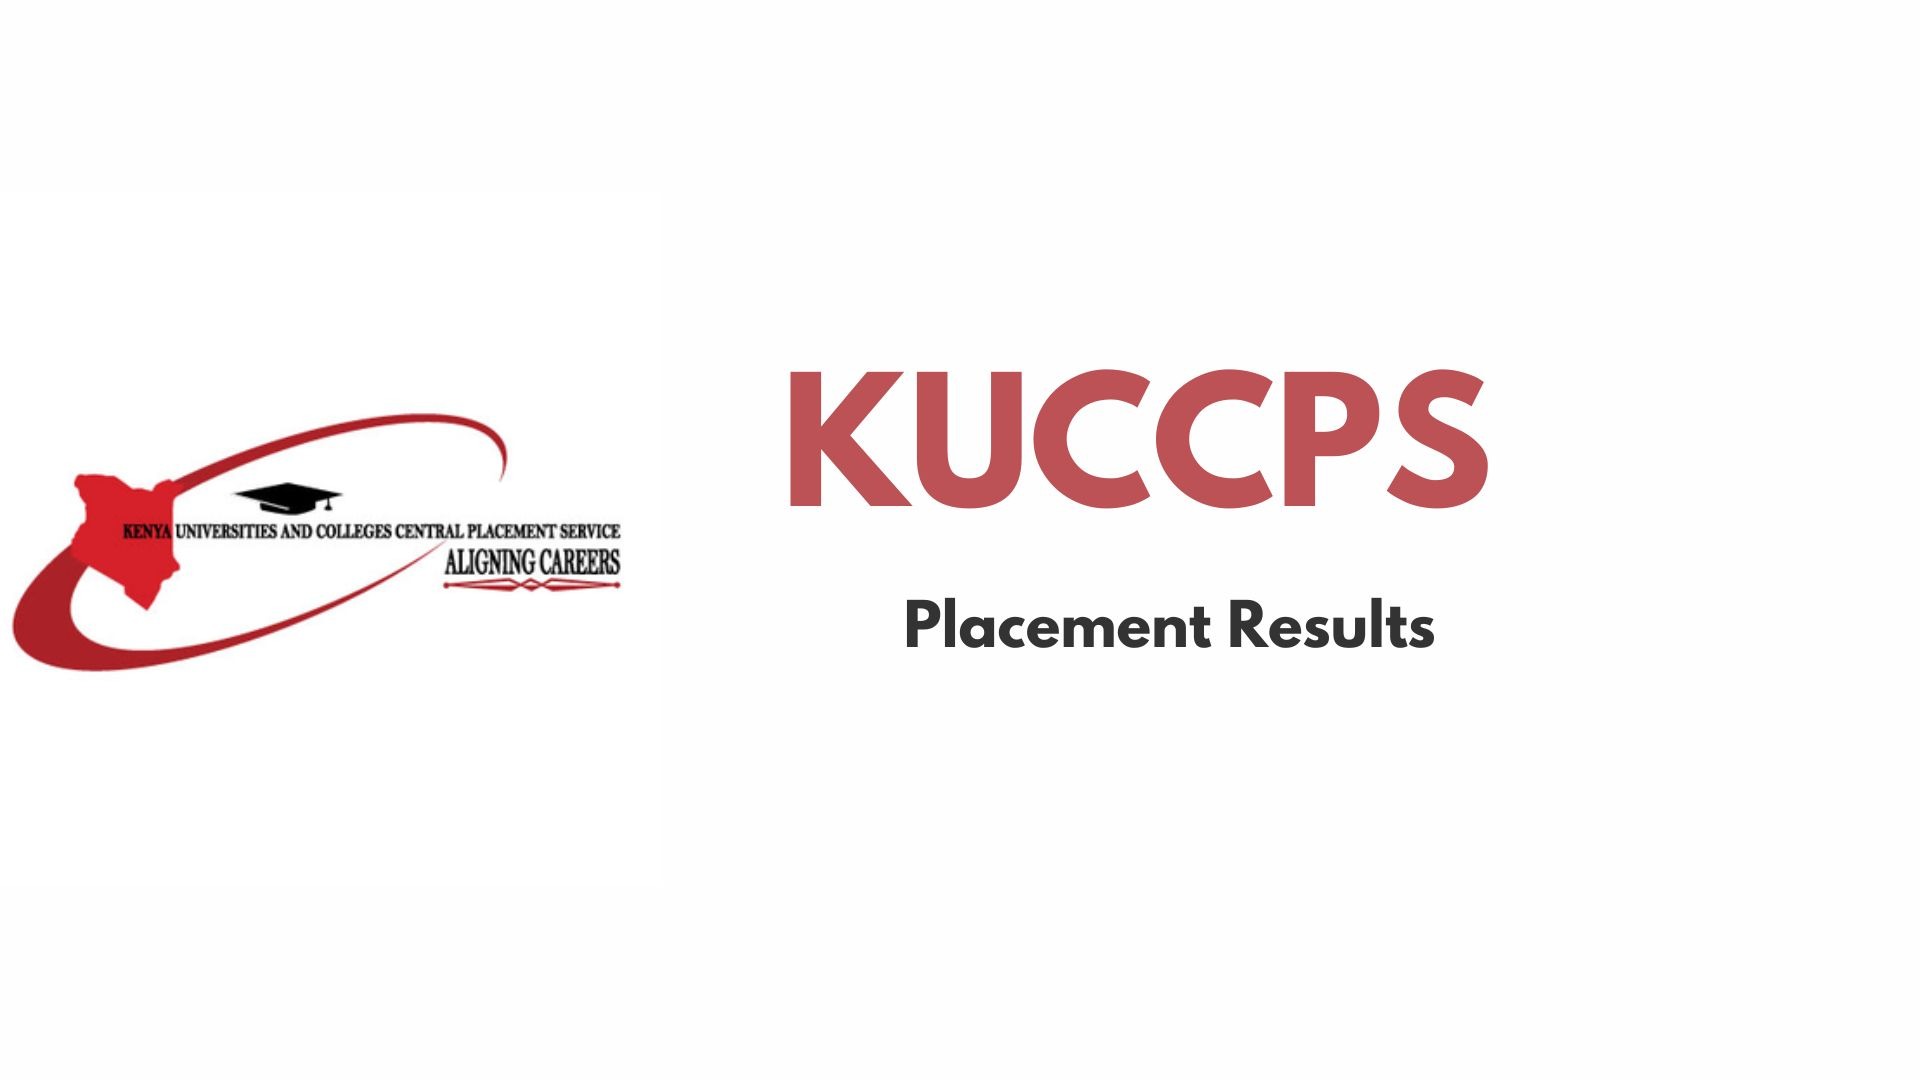 How to check KUCCPS placement results for universities, TVETs